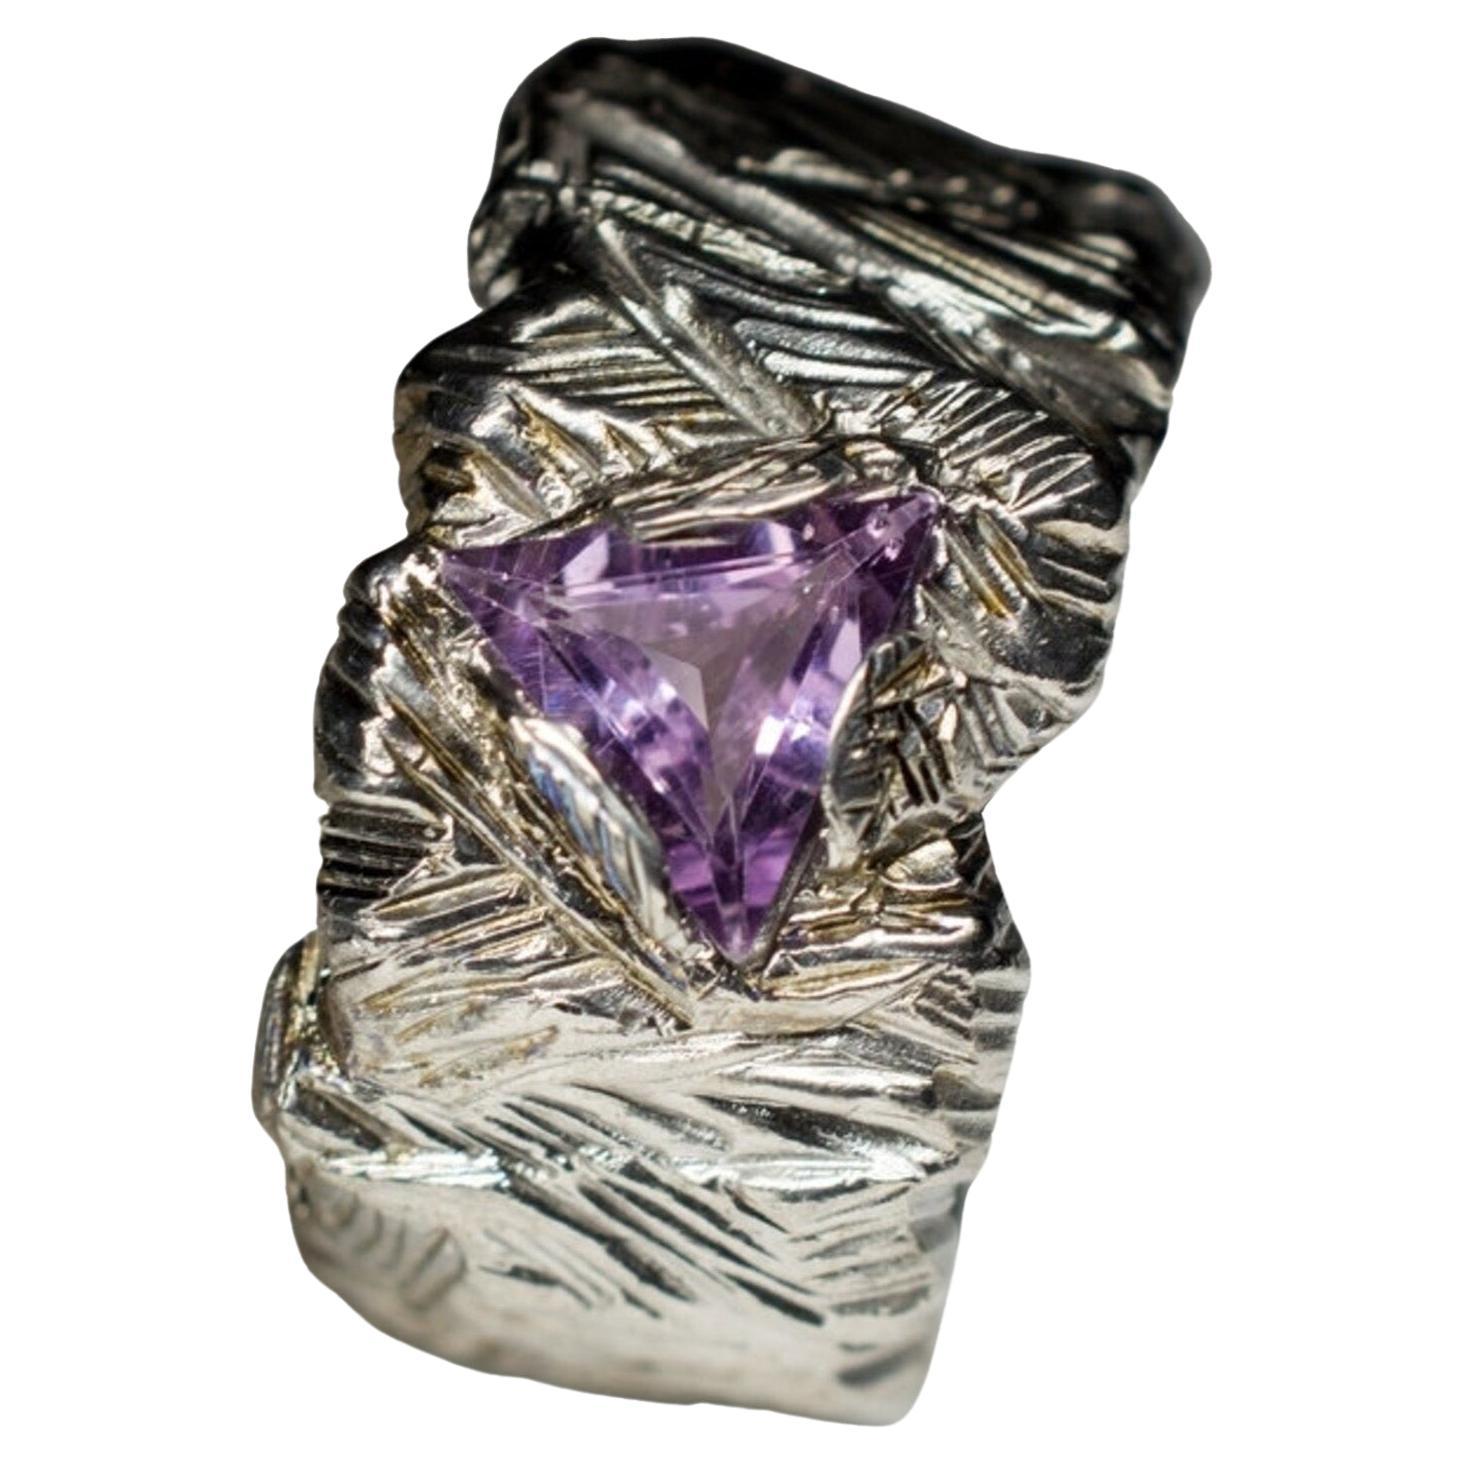 Big Amethyst Silver Ring Blackened Statement Jewels Natural Purple Violet Stone For Sale